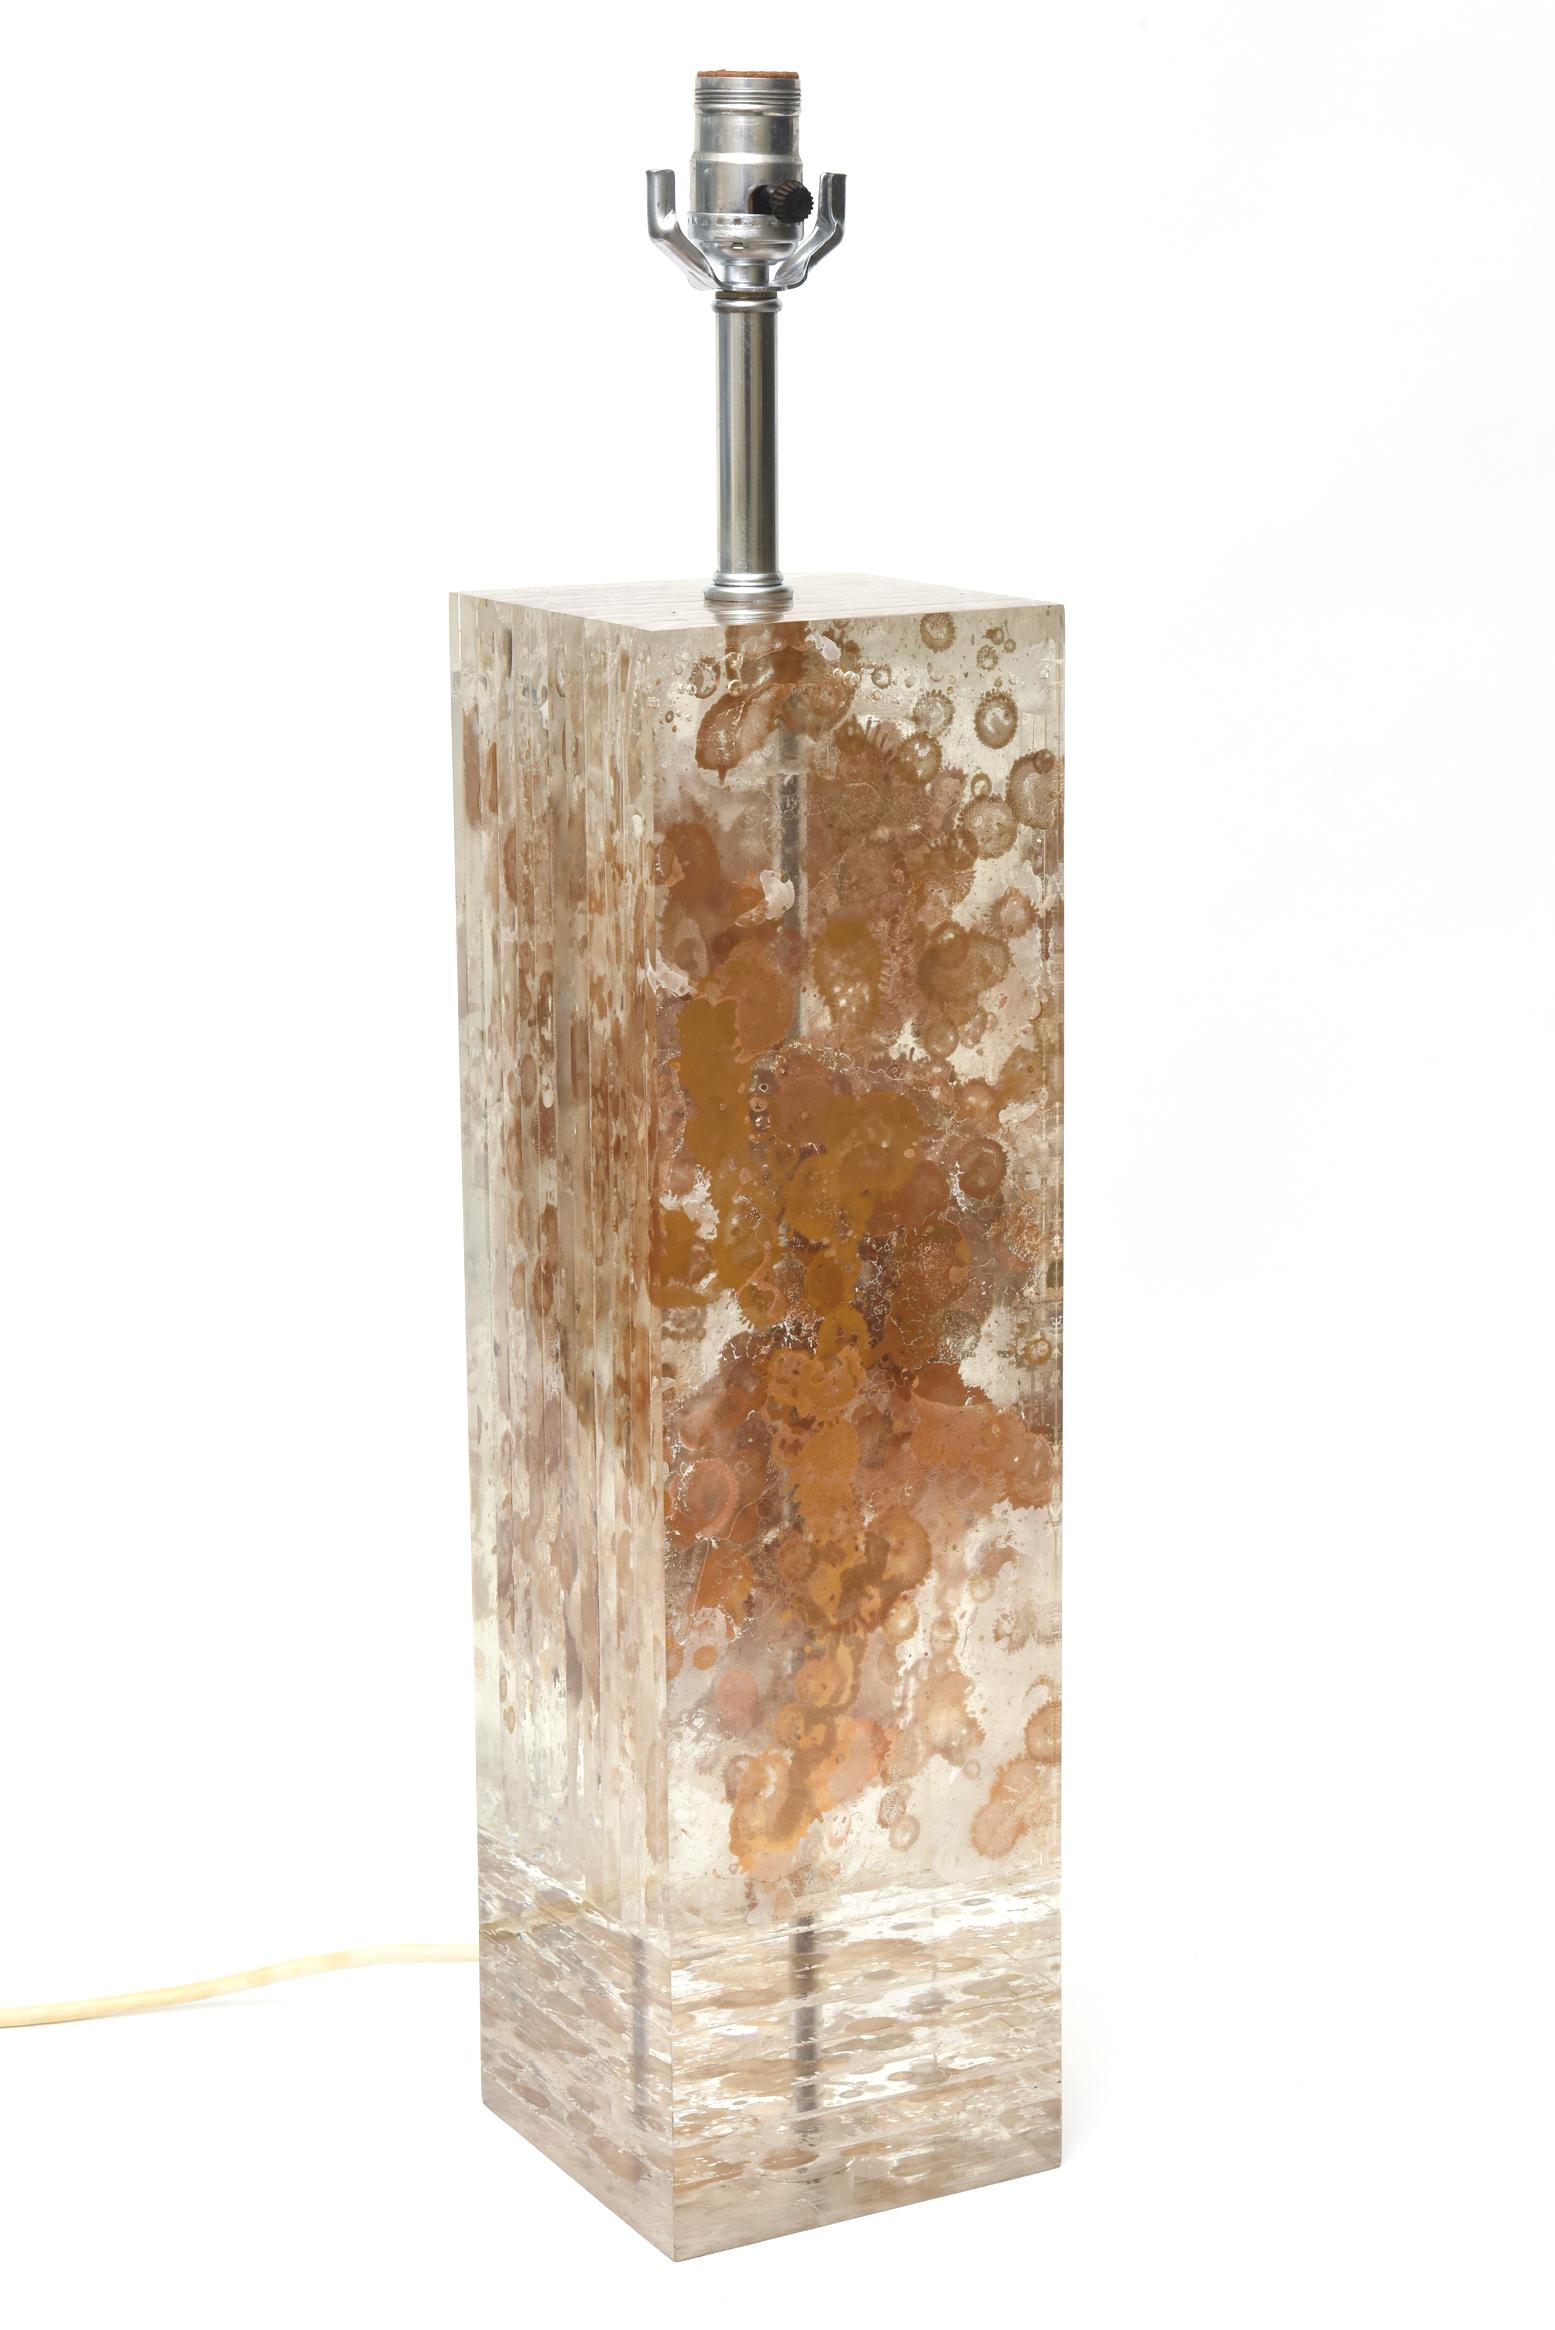 This amazing and stunning thick walled French vintage lucite column lamp is attributed to the work of Romeo Paris. It has inclusions of floating copper and gold leaf elements in fractal form. It is tall, heavy and has separate lucite columns inside.